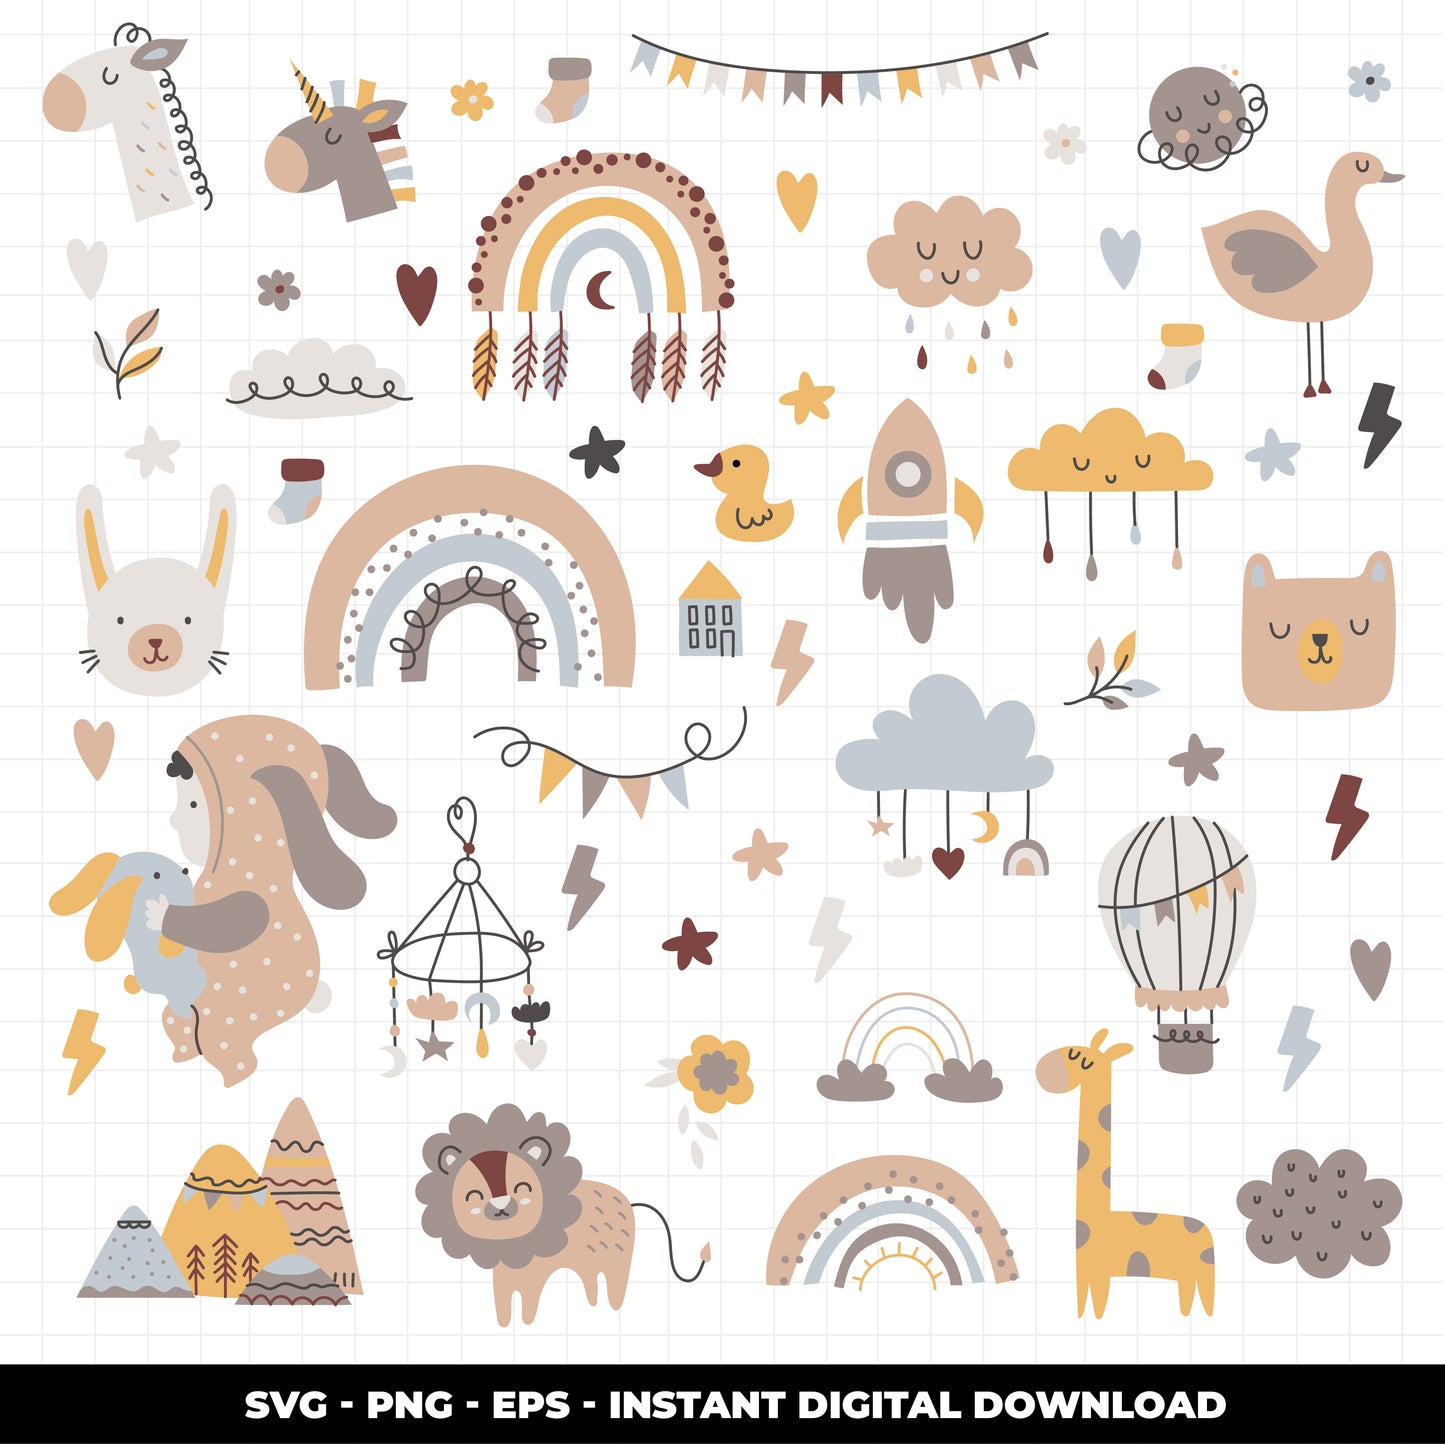 COD1138 Baby svg, baby doodle svg, baby png, baby clipart, unicorn baby svg